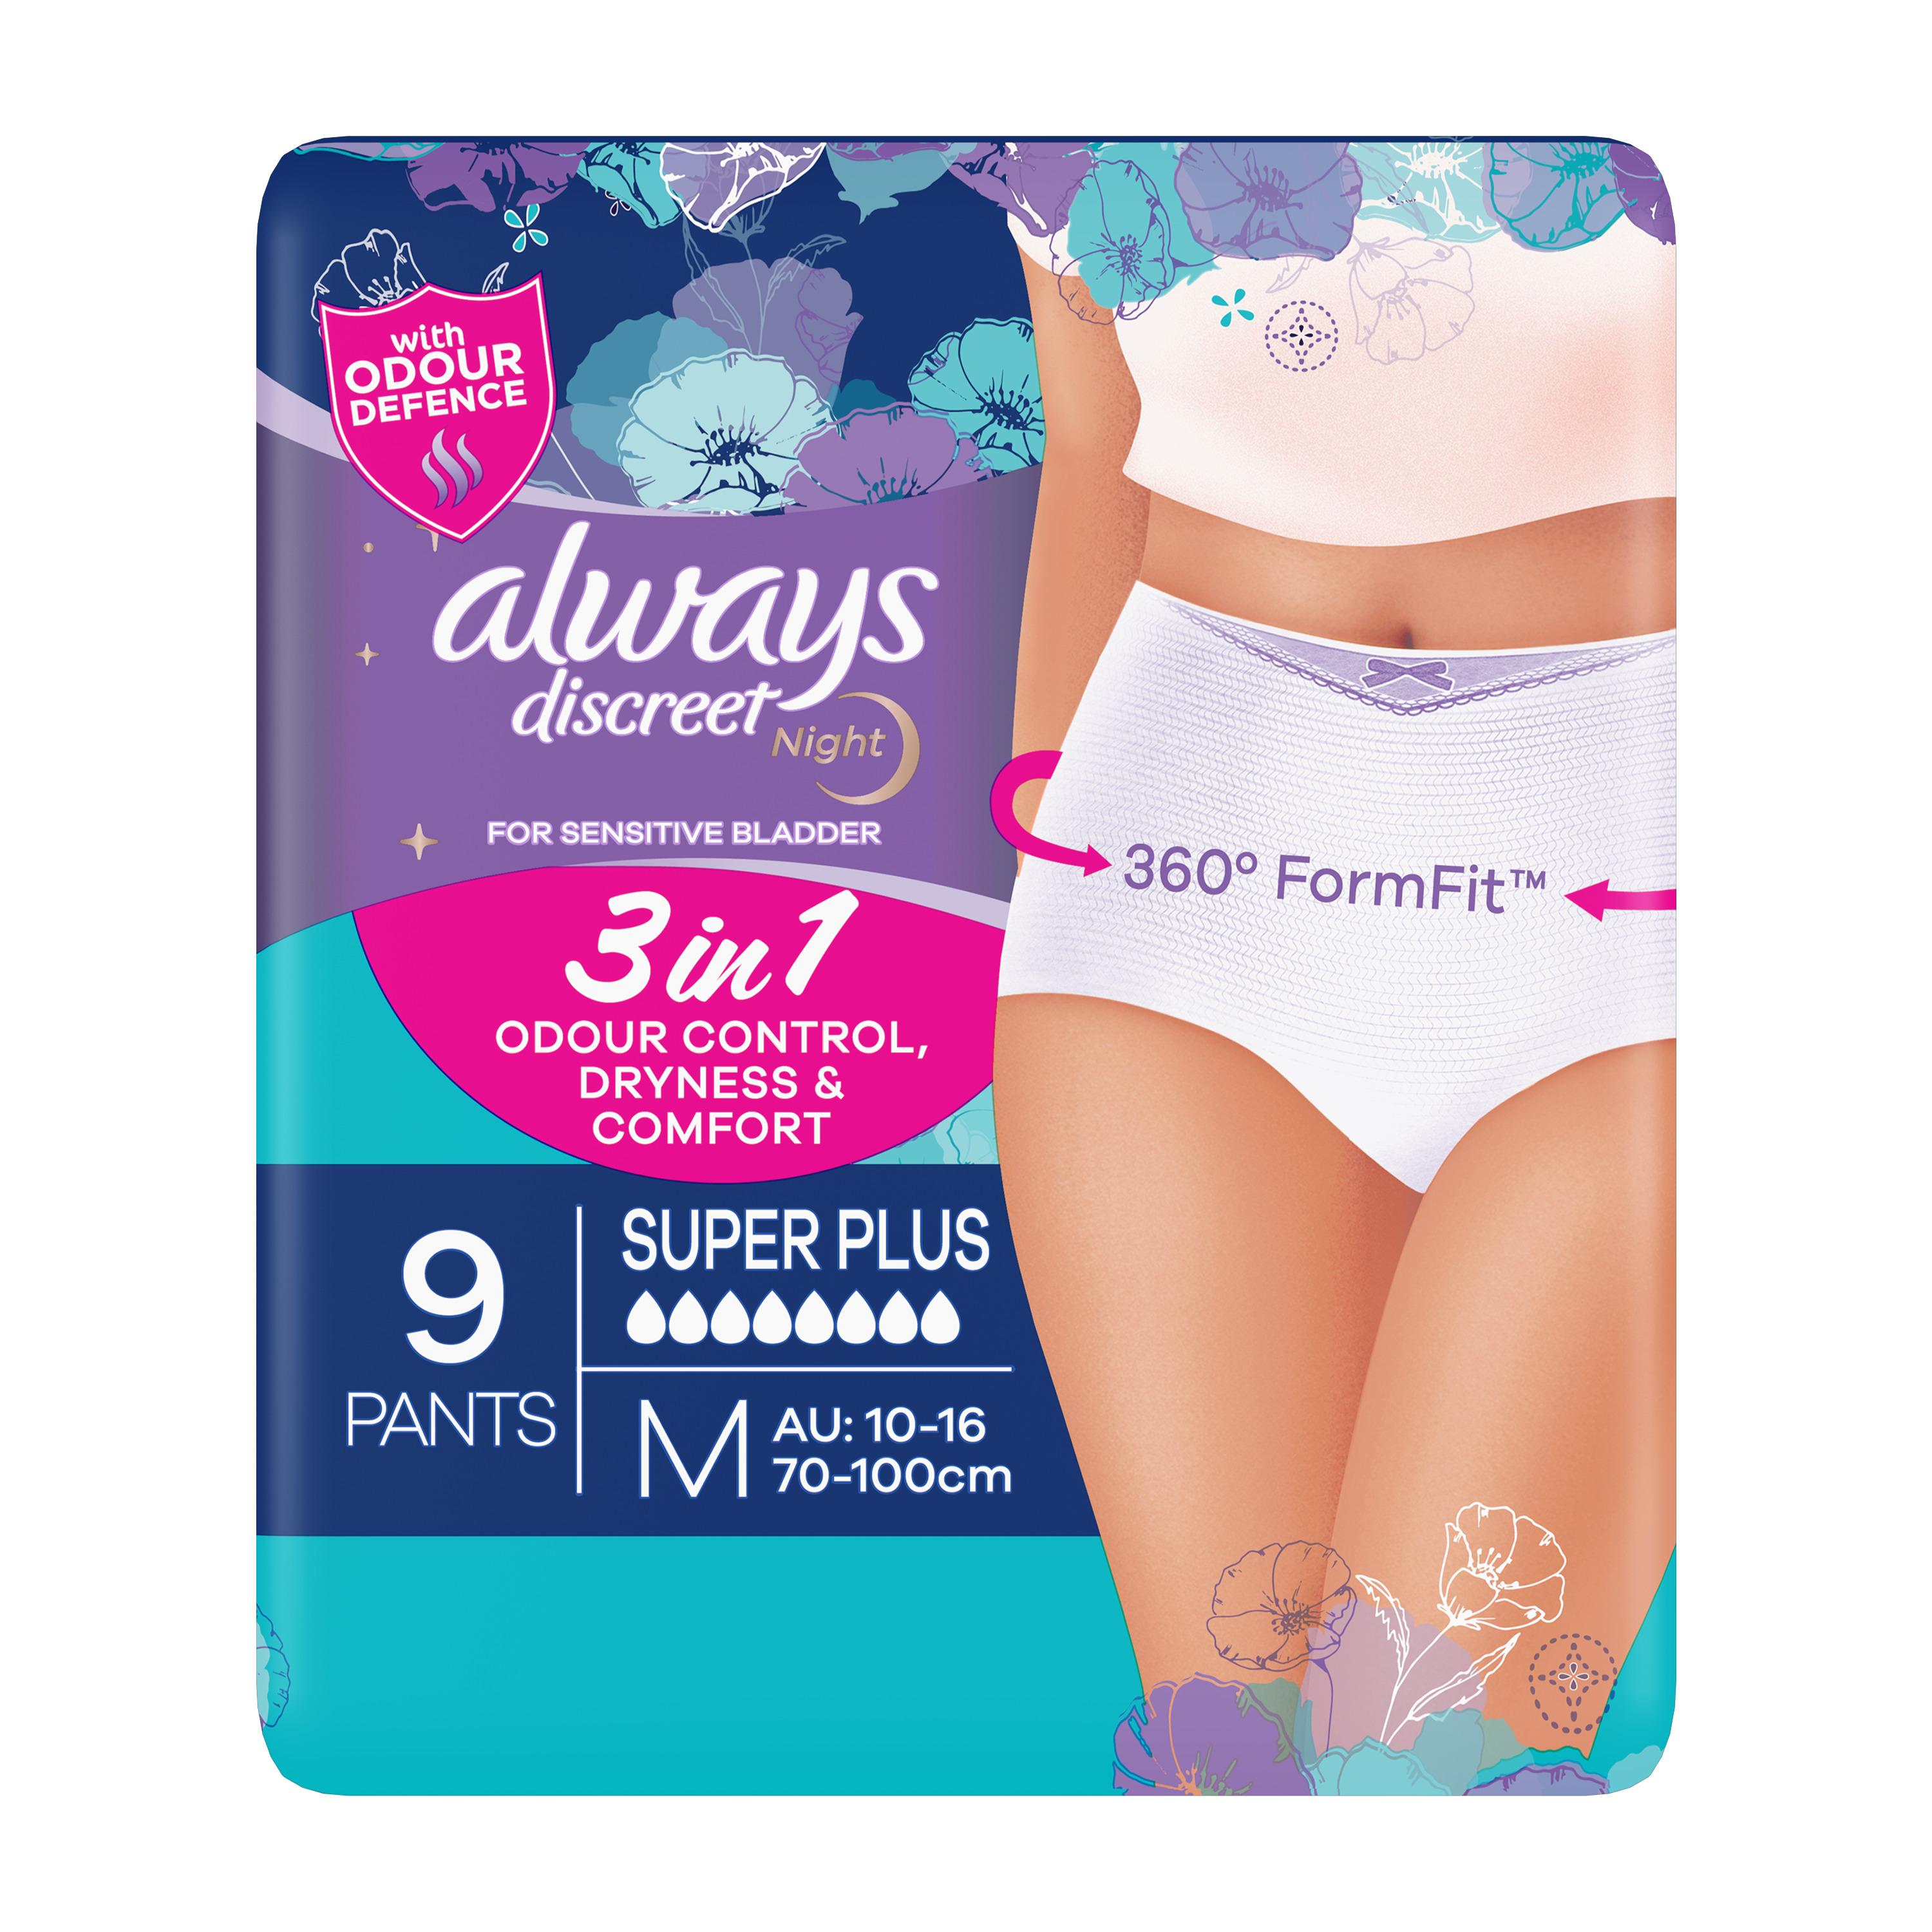 Pack of Always Discreet Incontinence, underwear for day or night usage, medium size with 360° FormFit, 9 pants